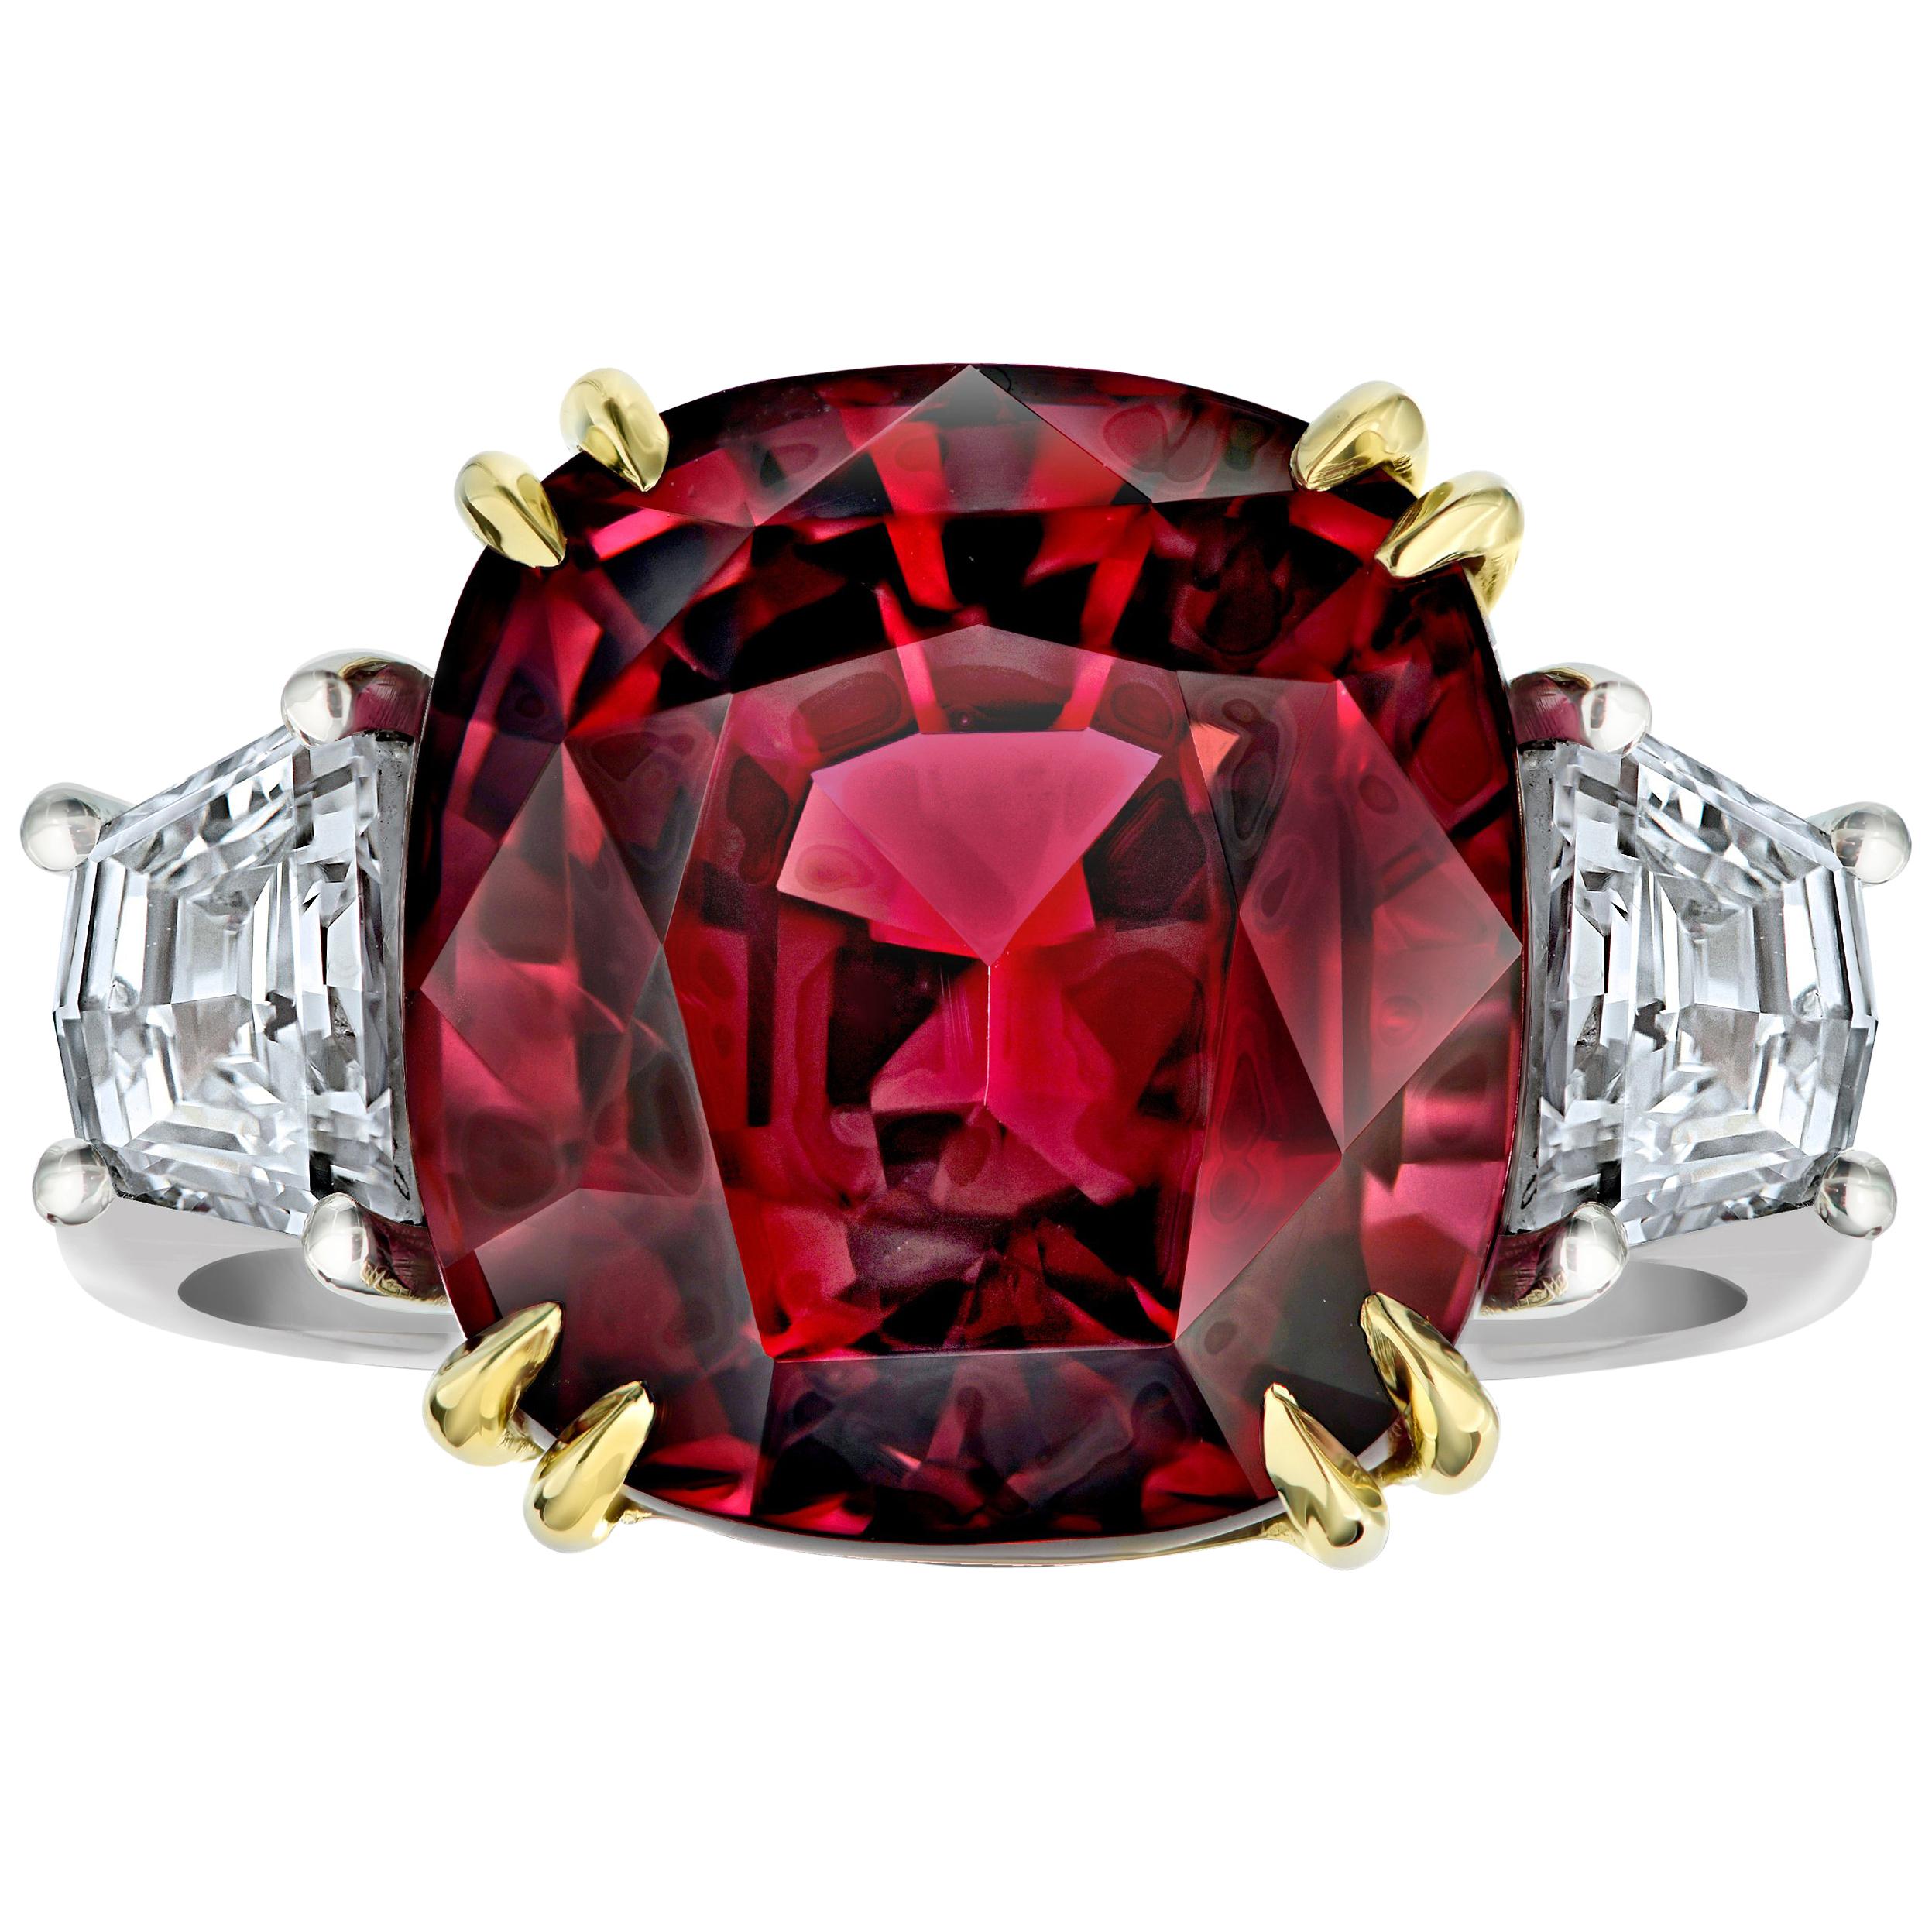 18.37 Carat Cushion Red Spinel and Diamond Platinum and 18K Ring